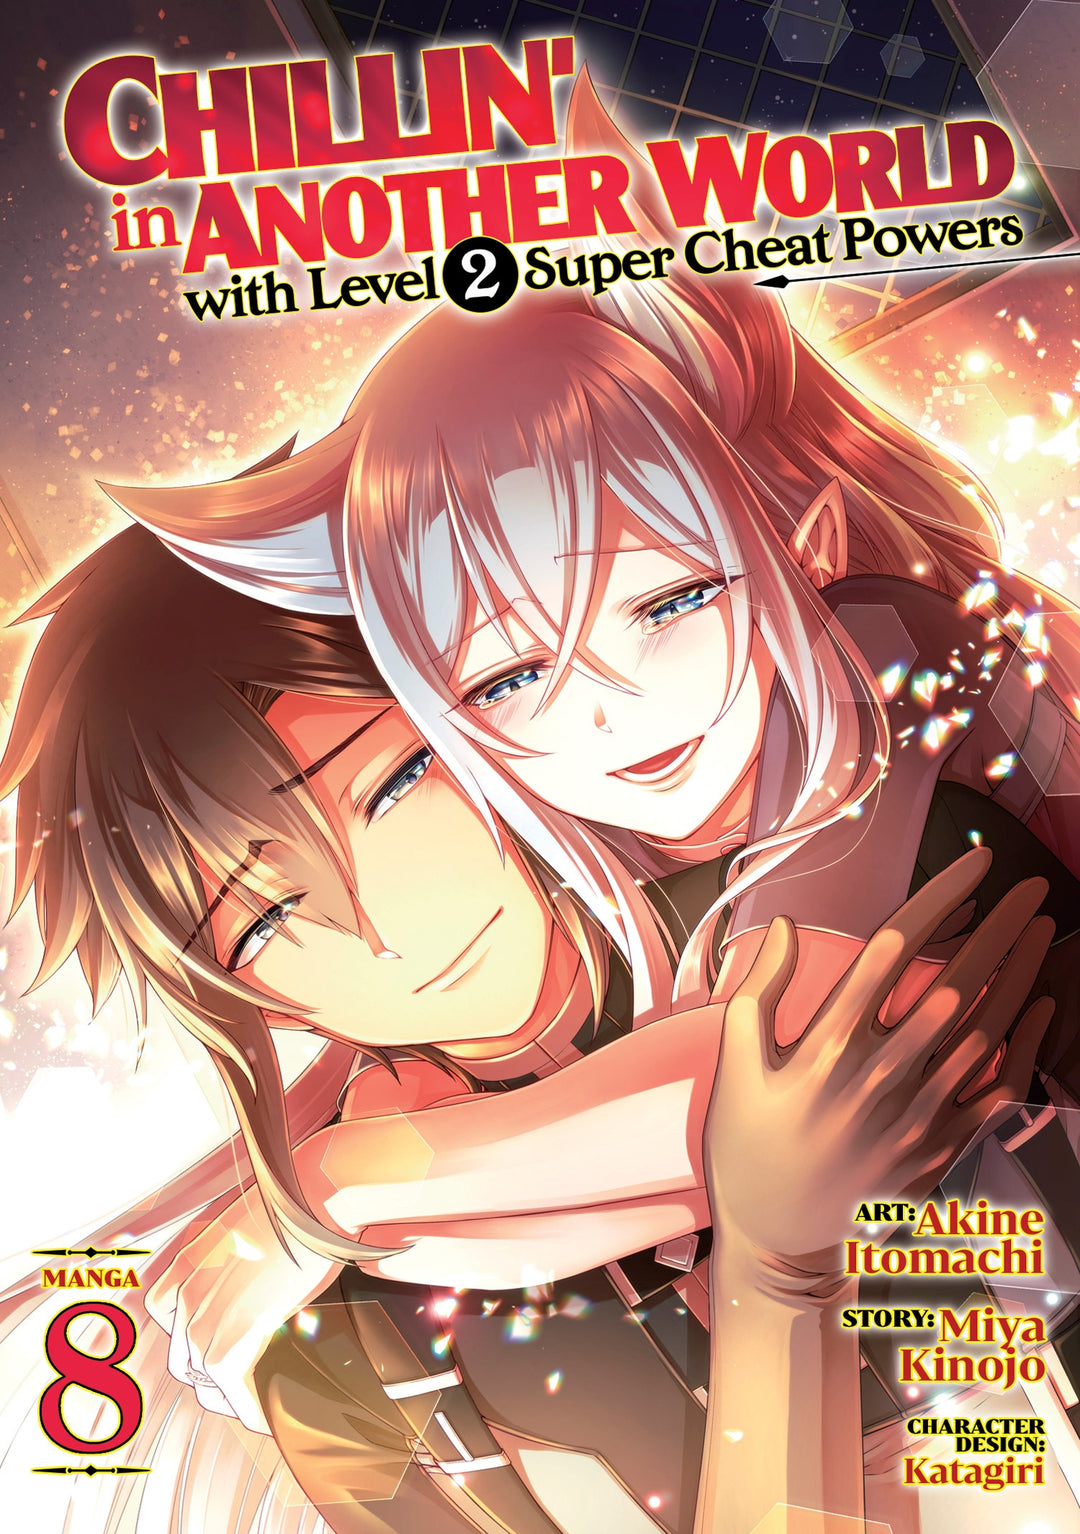 Chillin' in Another World with Level 2 Super Cheat Powers (Manga), Vol. 08